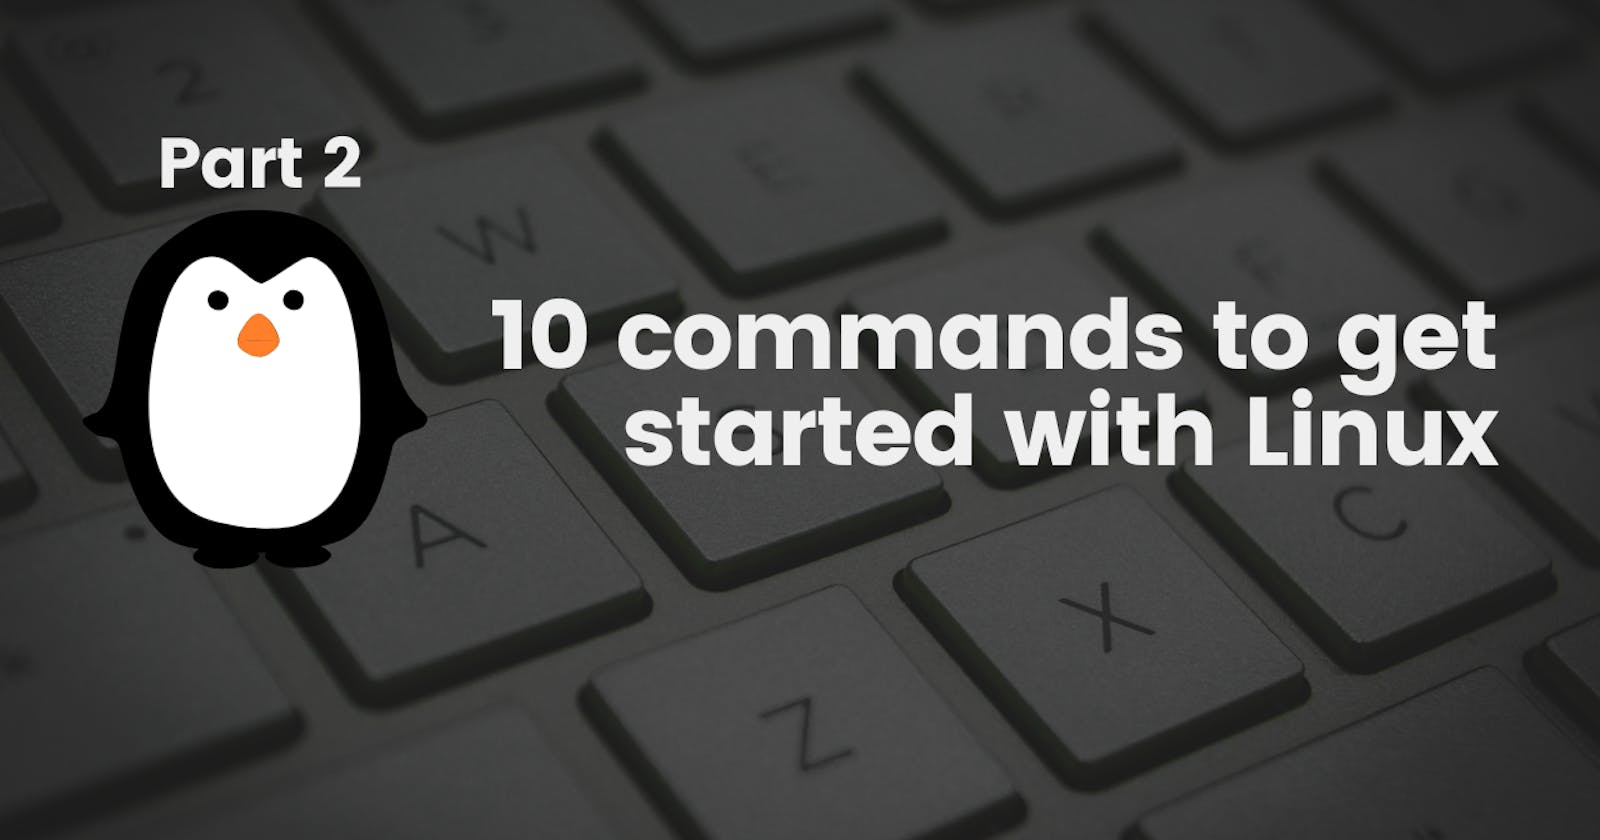 10 Linux commands to get started (Part 2)